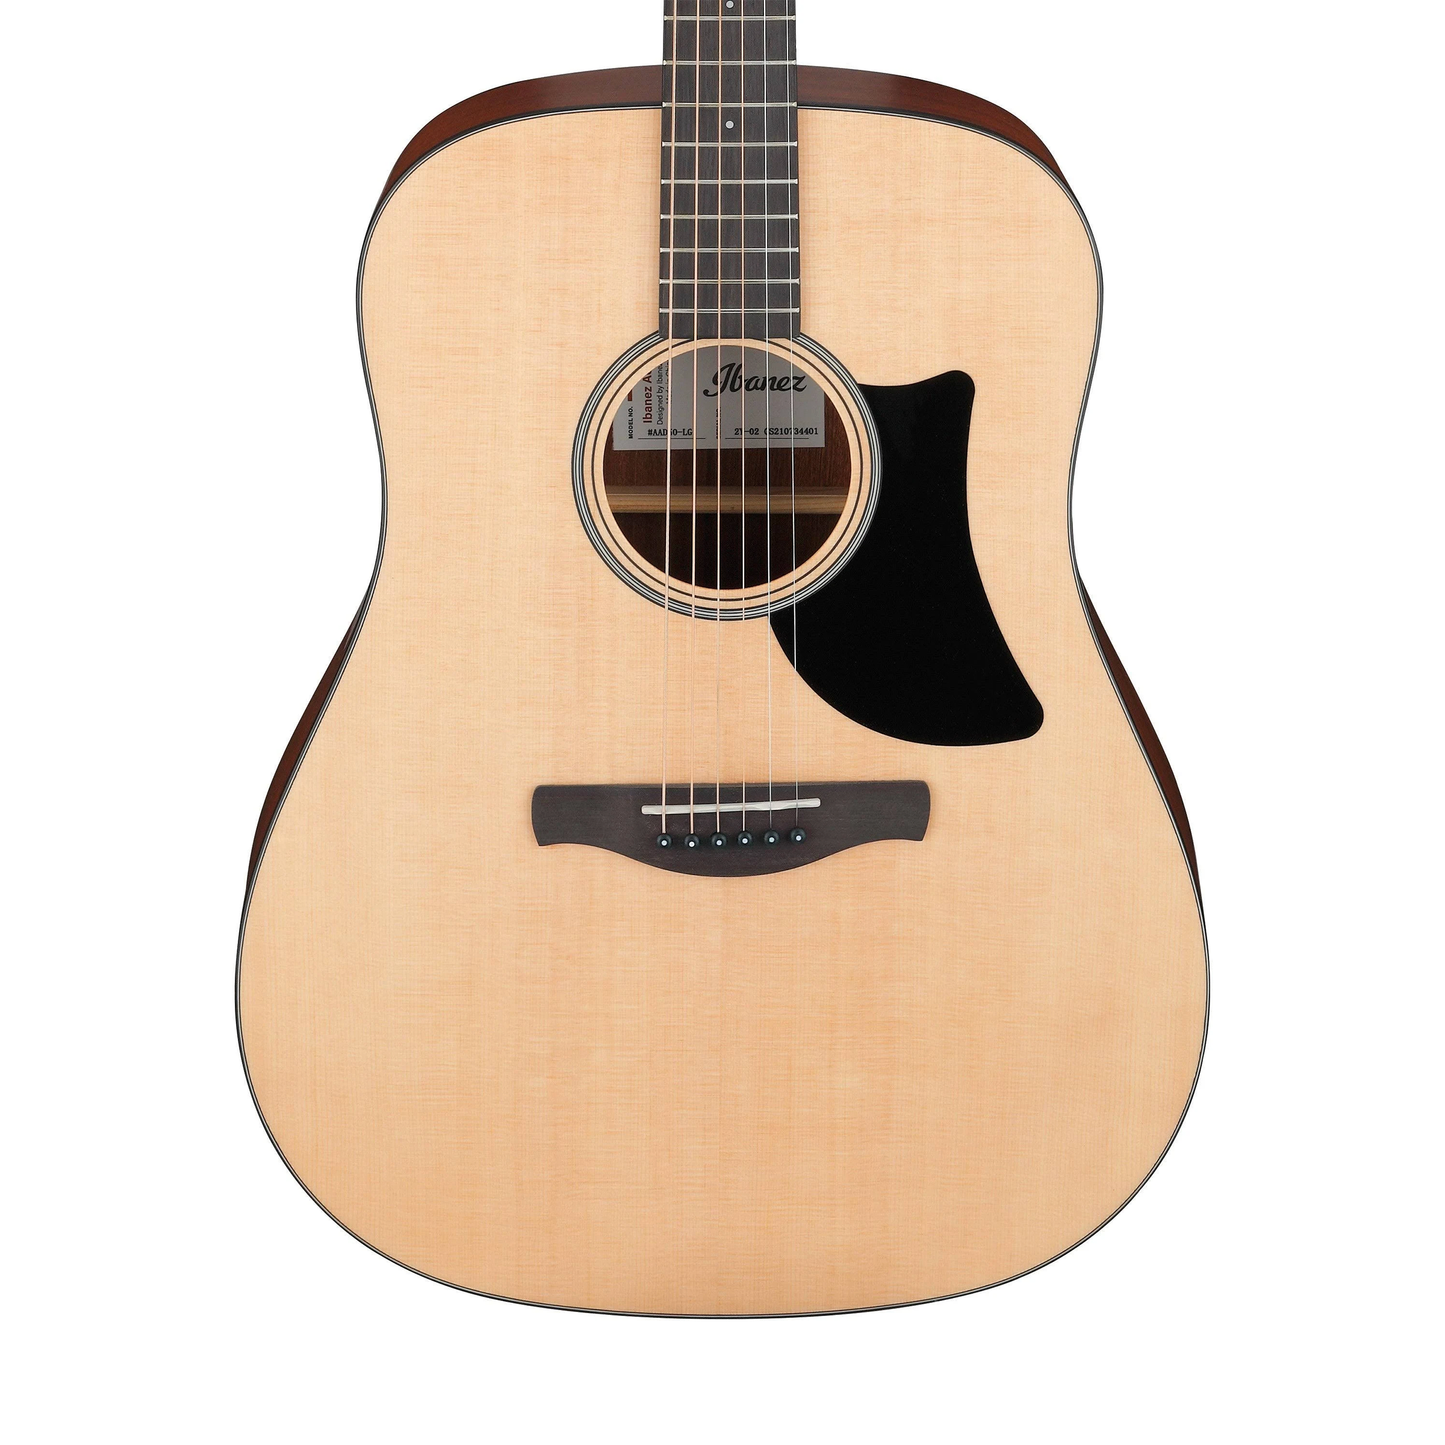 Ibanez AAD50 Advanced Acoustic Guitar in Natural Low Gloss